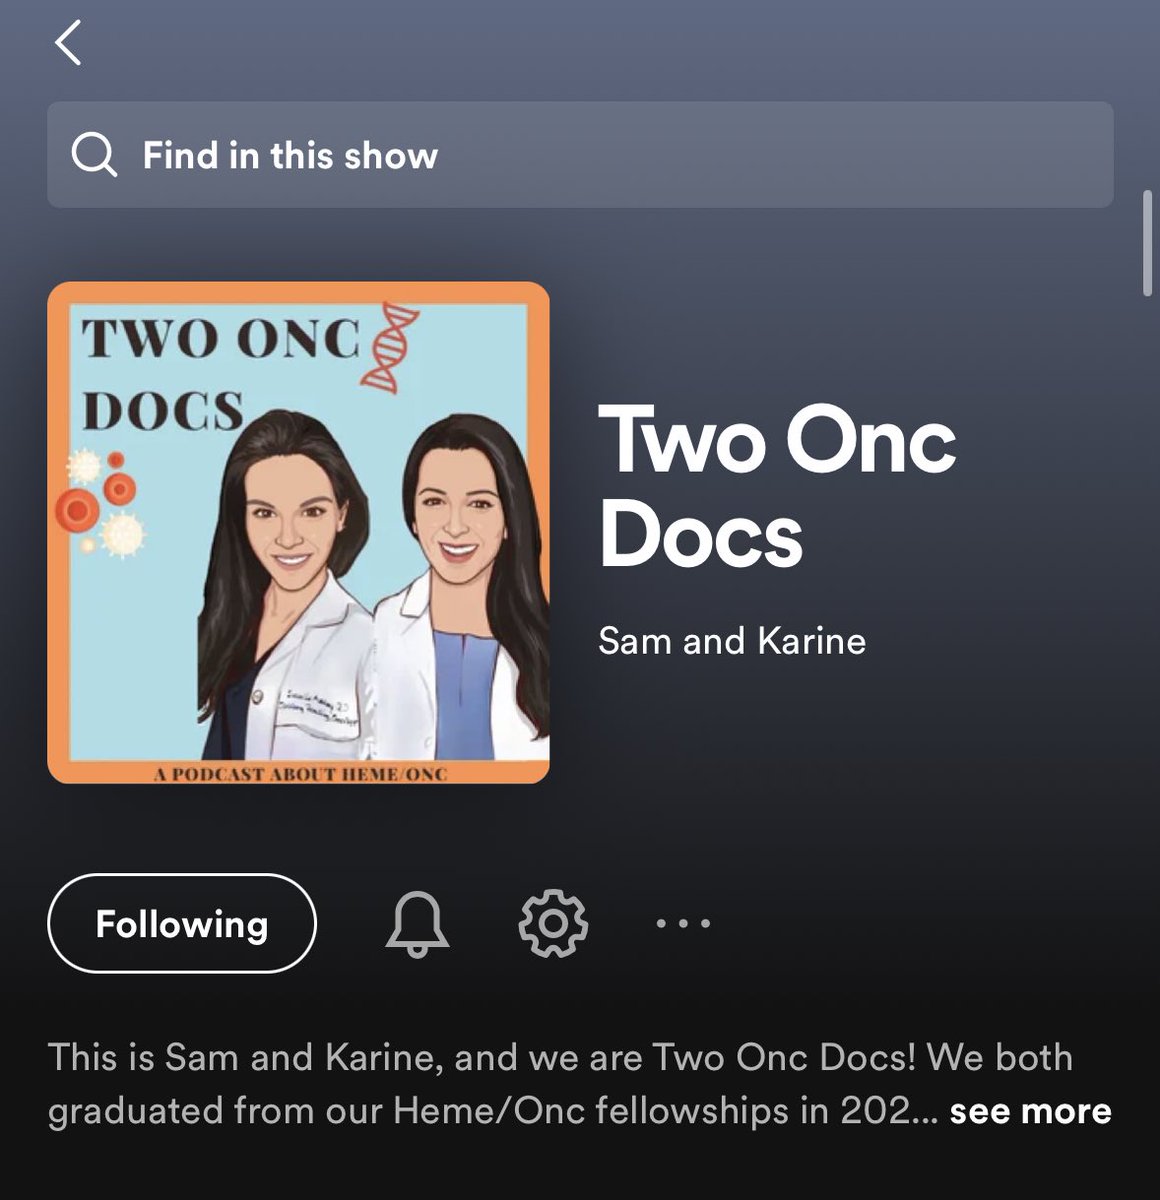 Good news for Spotify listeners, you can now find us here! open.spotify.com/show/6C7BtpadM… And feel free to send us topic or episode redo/update requests!